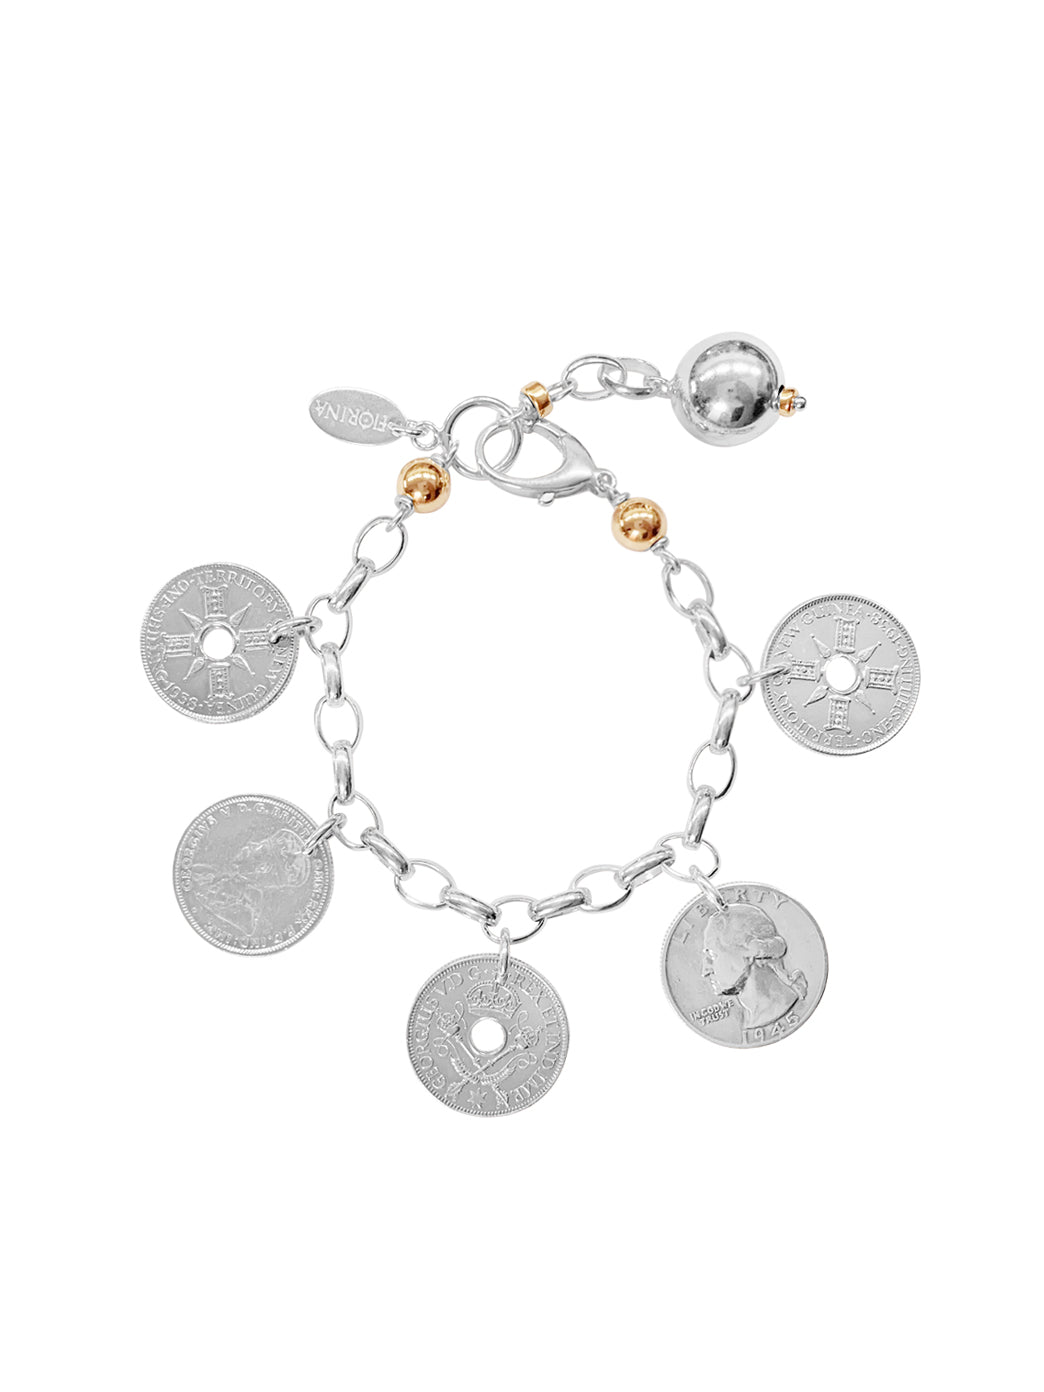 Anniyo Turkish Coin Bracelet for Women Men Turkey's Ancient Coins Banglet  Turk Jewelry Gold and Silver Color #122601